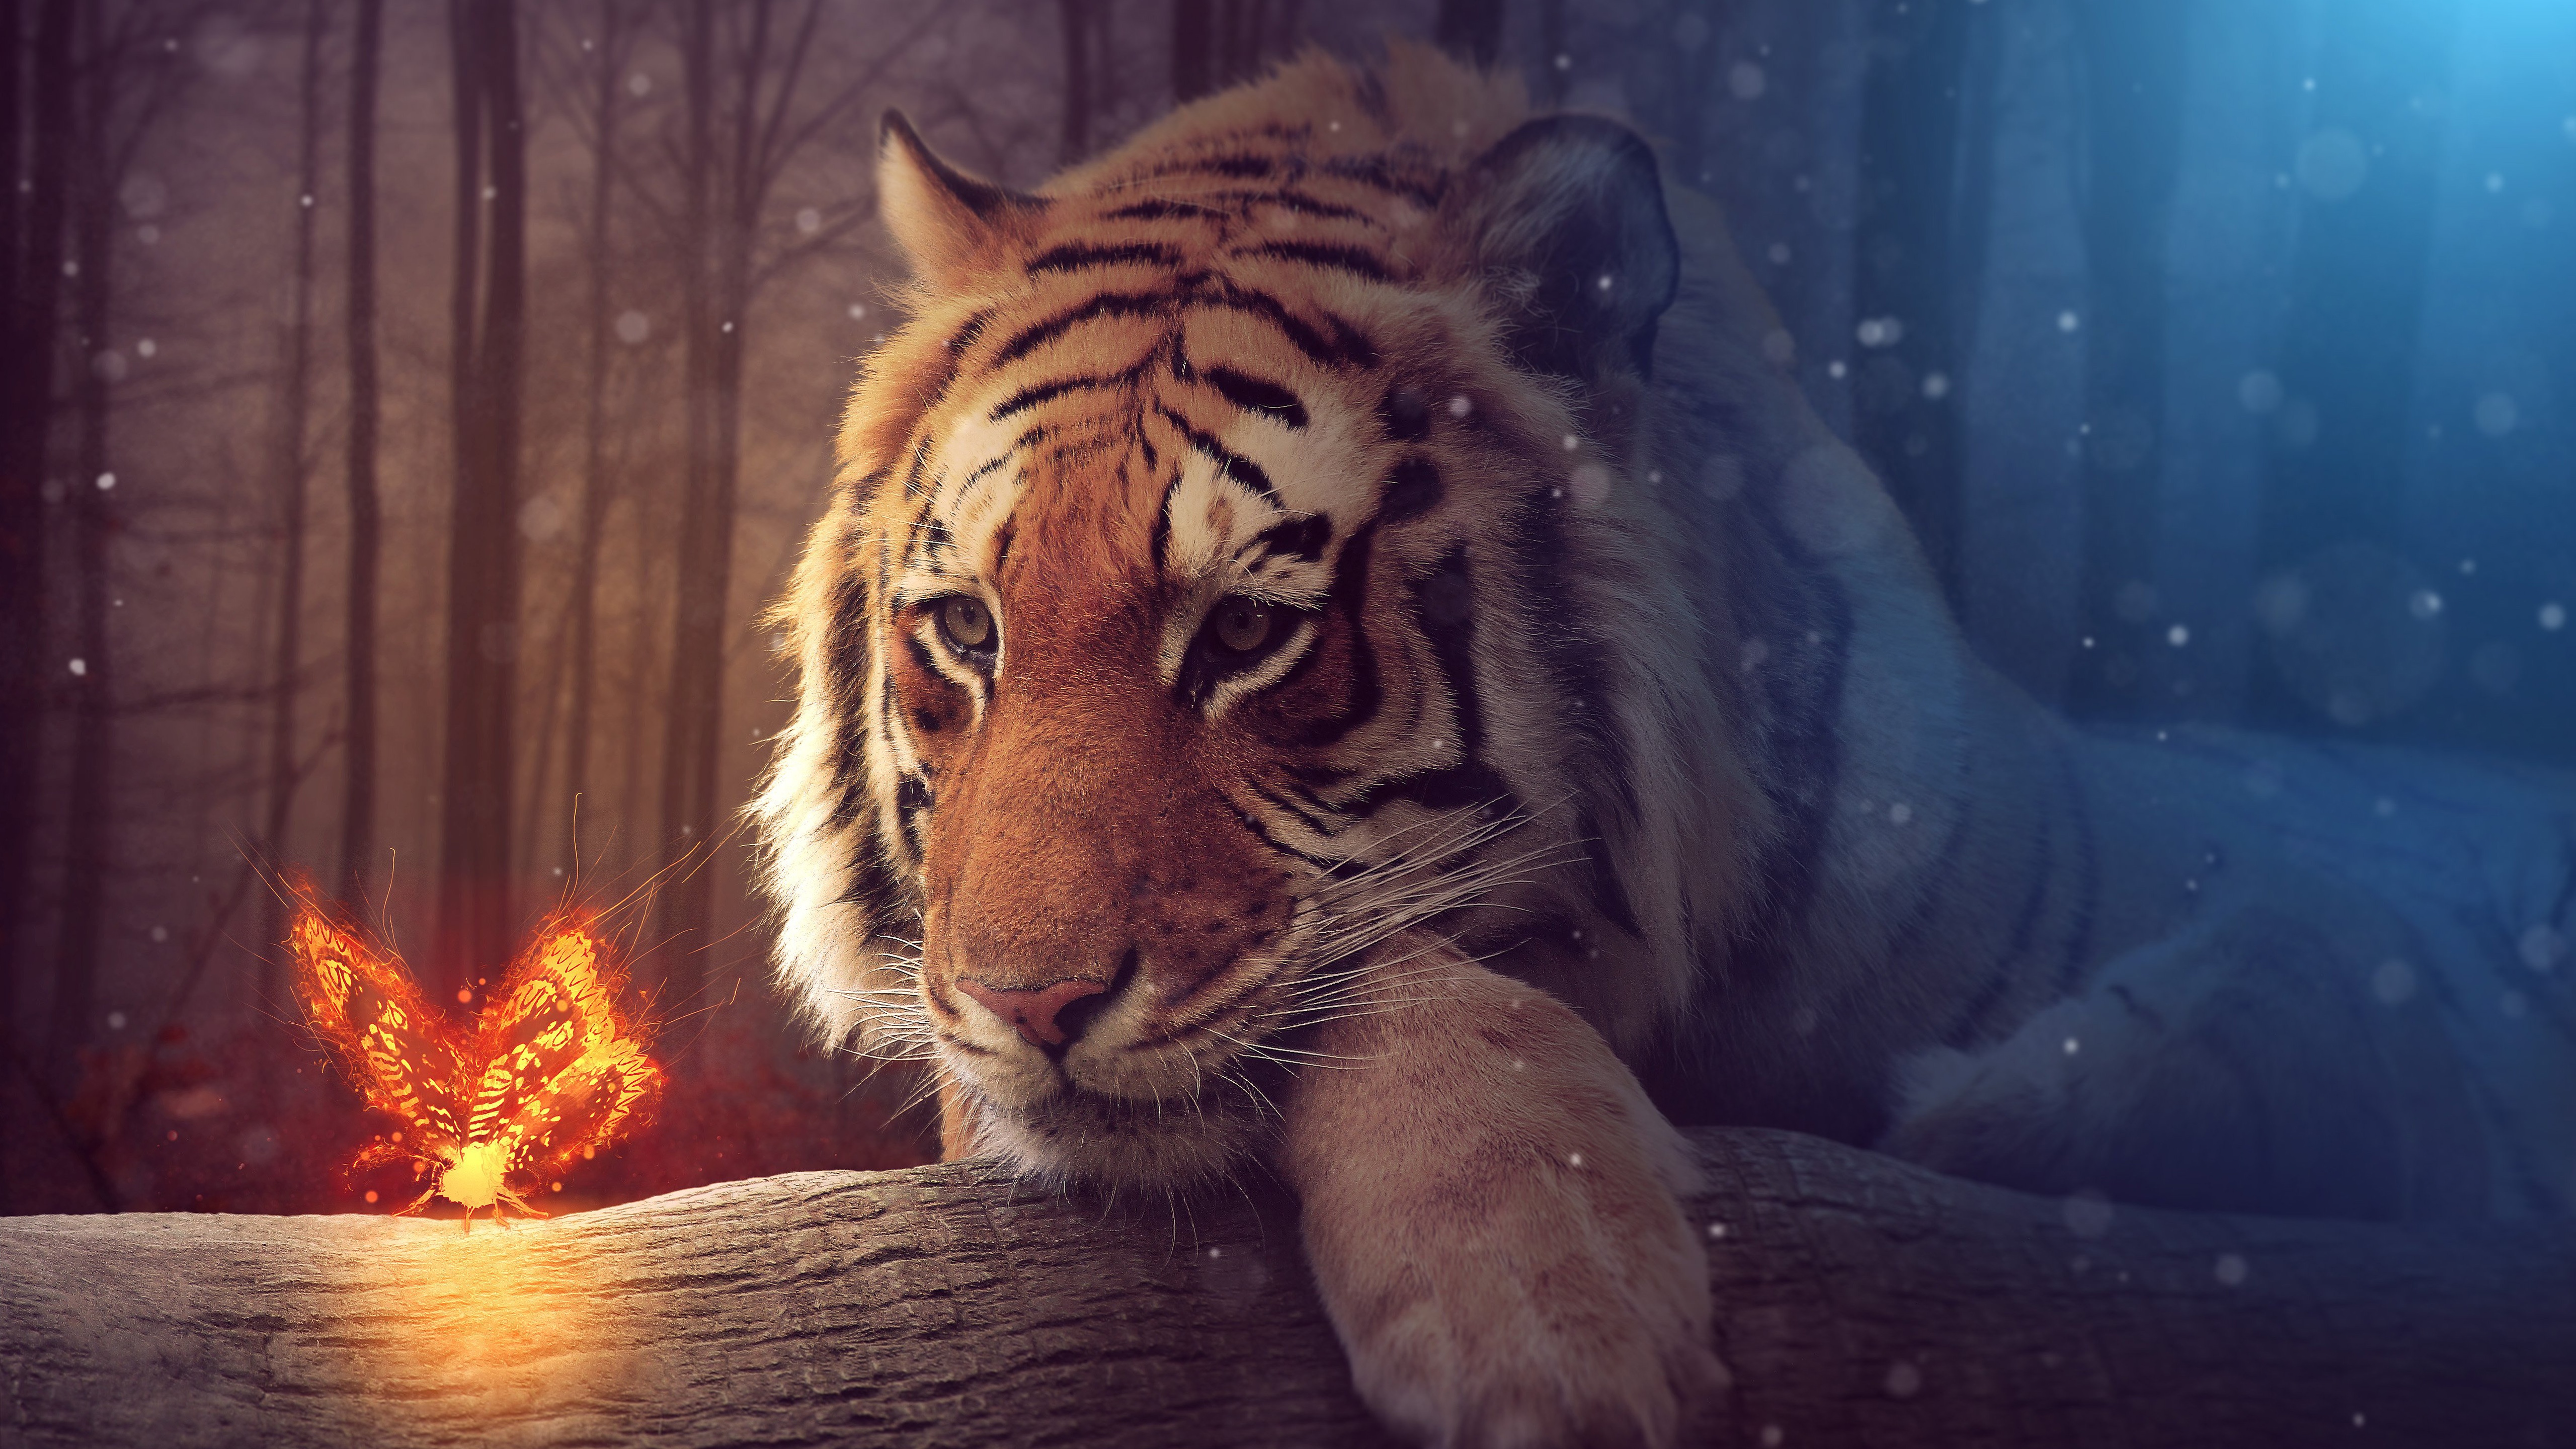 photography, manipulation, firefly, tiger